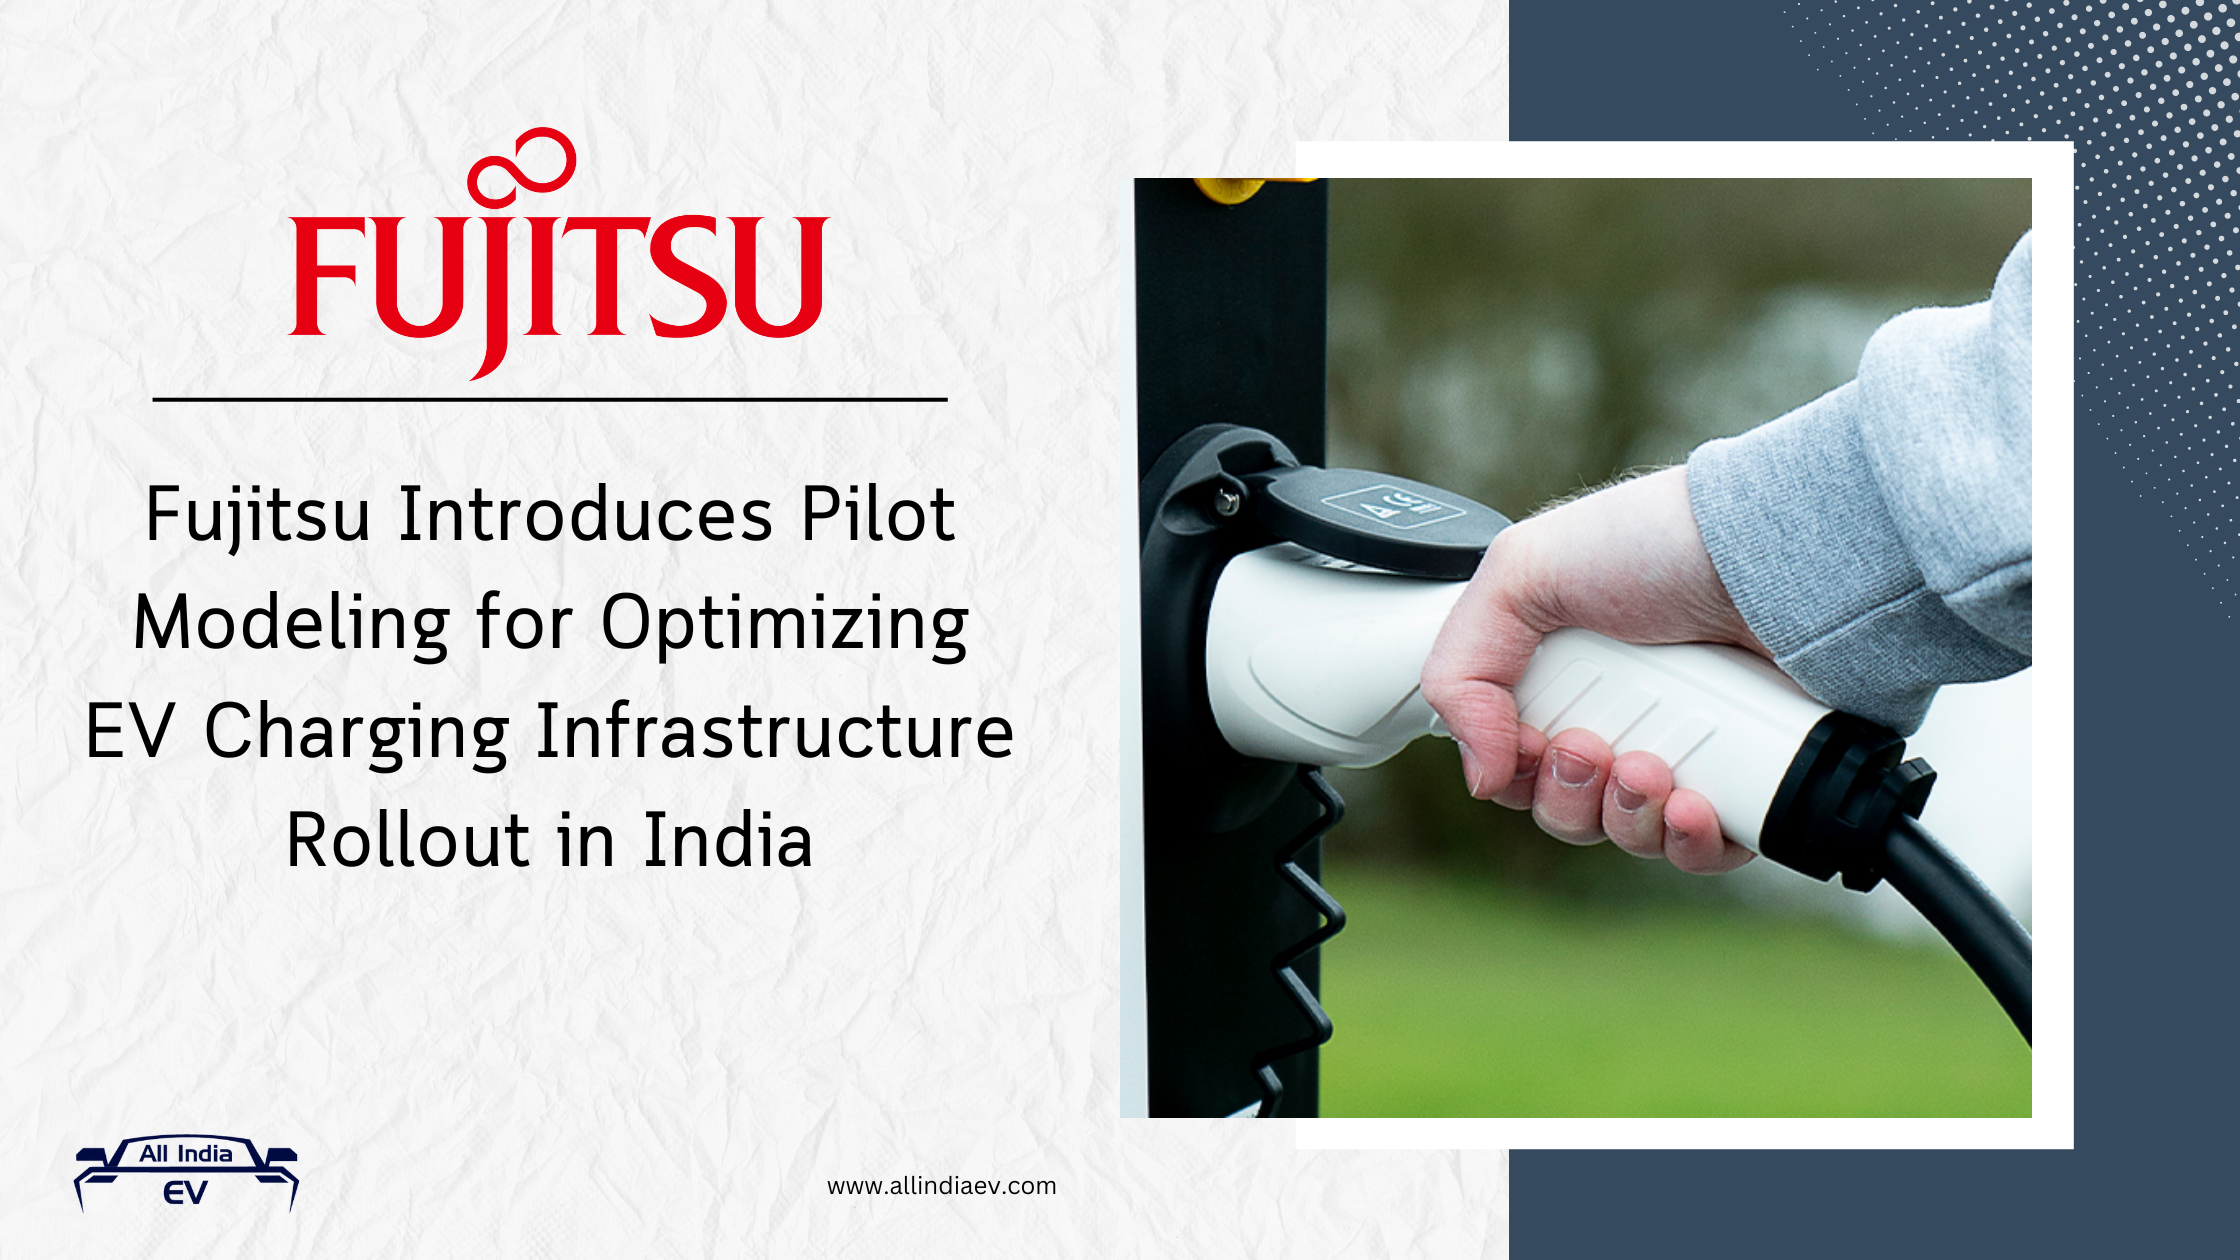 Fujitsu Introduces Pilot Modeling for Optimizing EV Charging Infrastructure Rollout in India